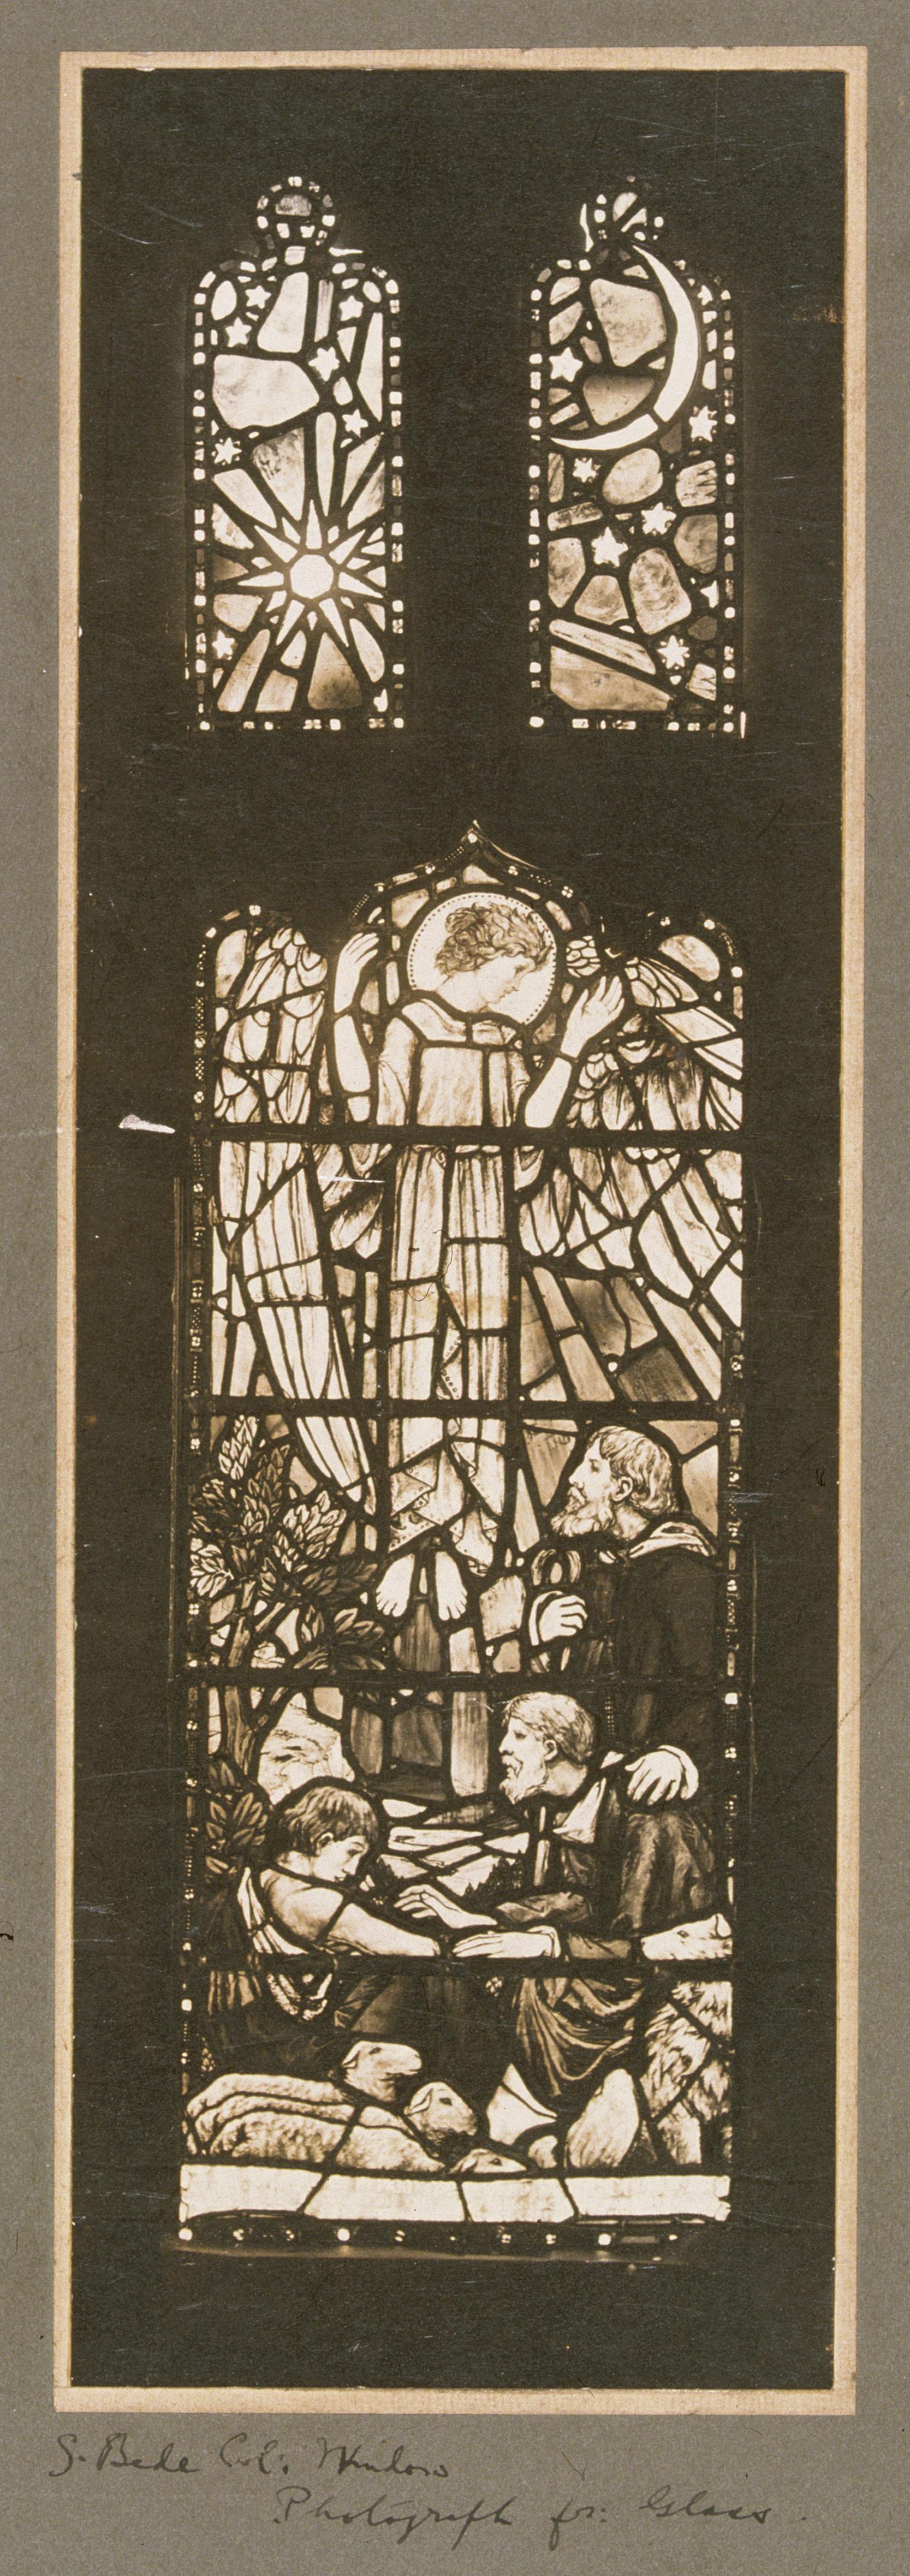 Memorial stained glass window in St Bede's College